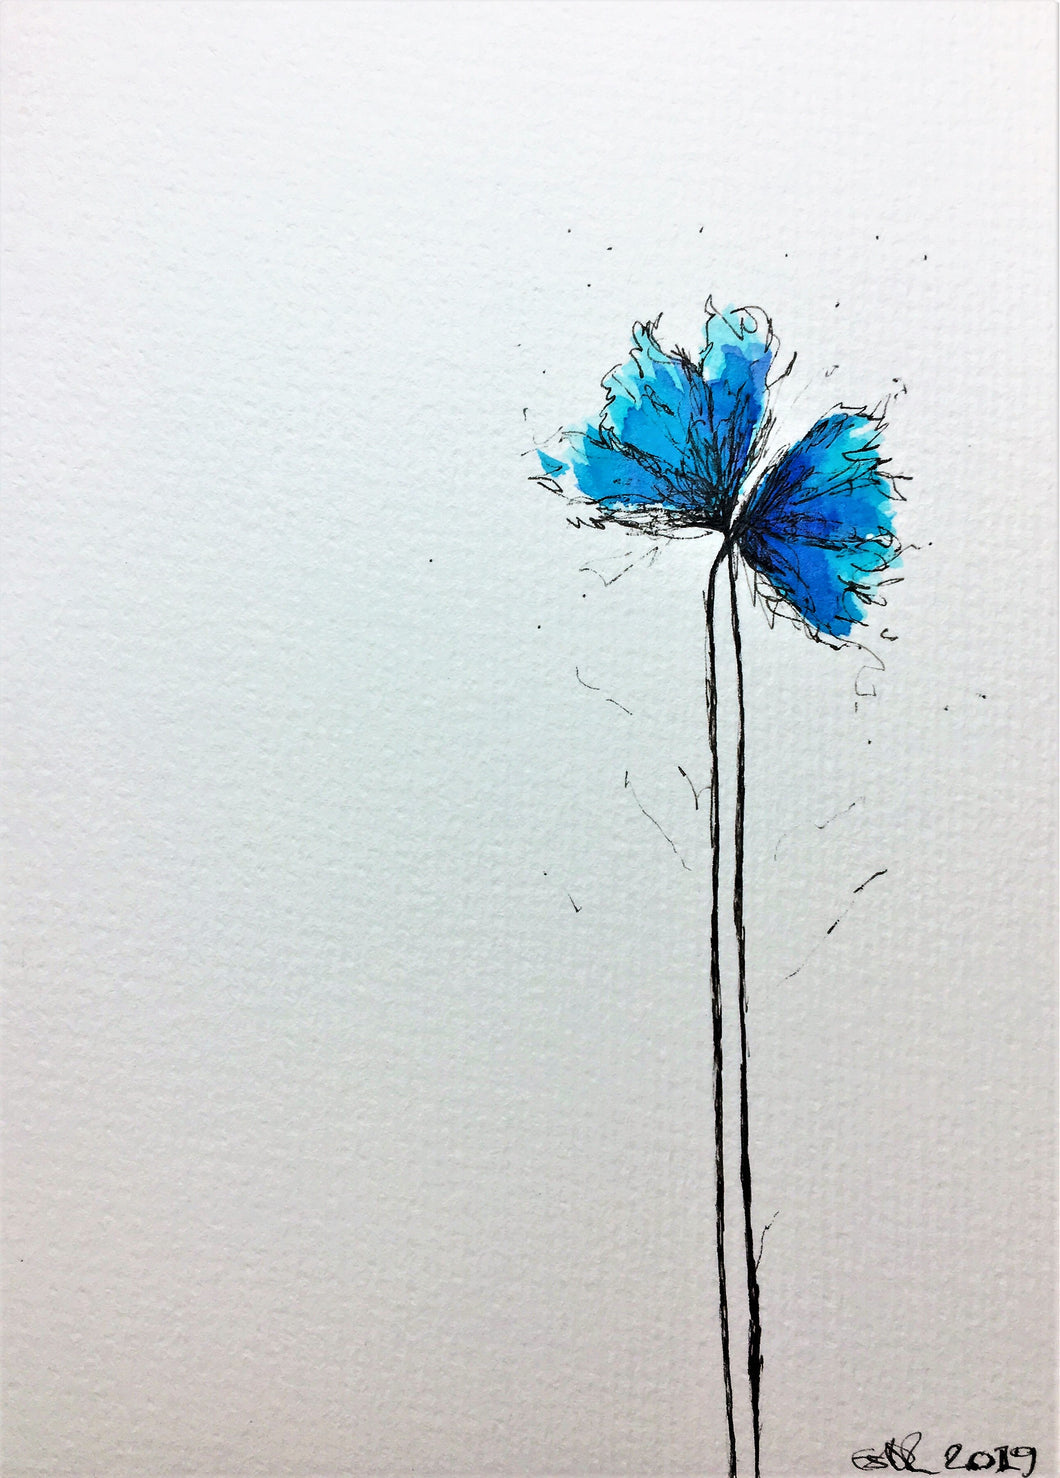 Handpainted Watercolour Greeting Card - Abstract Small Blue/Turquoise Flowers Design - eDgE dEsiGn London